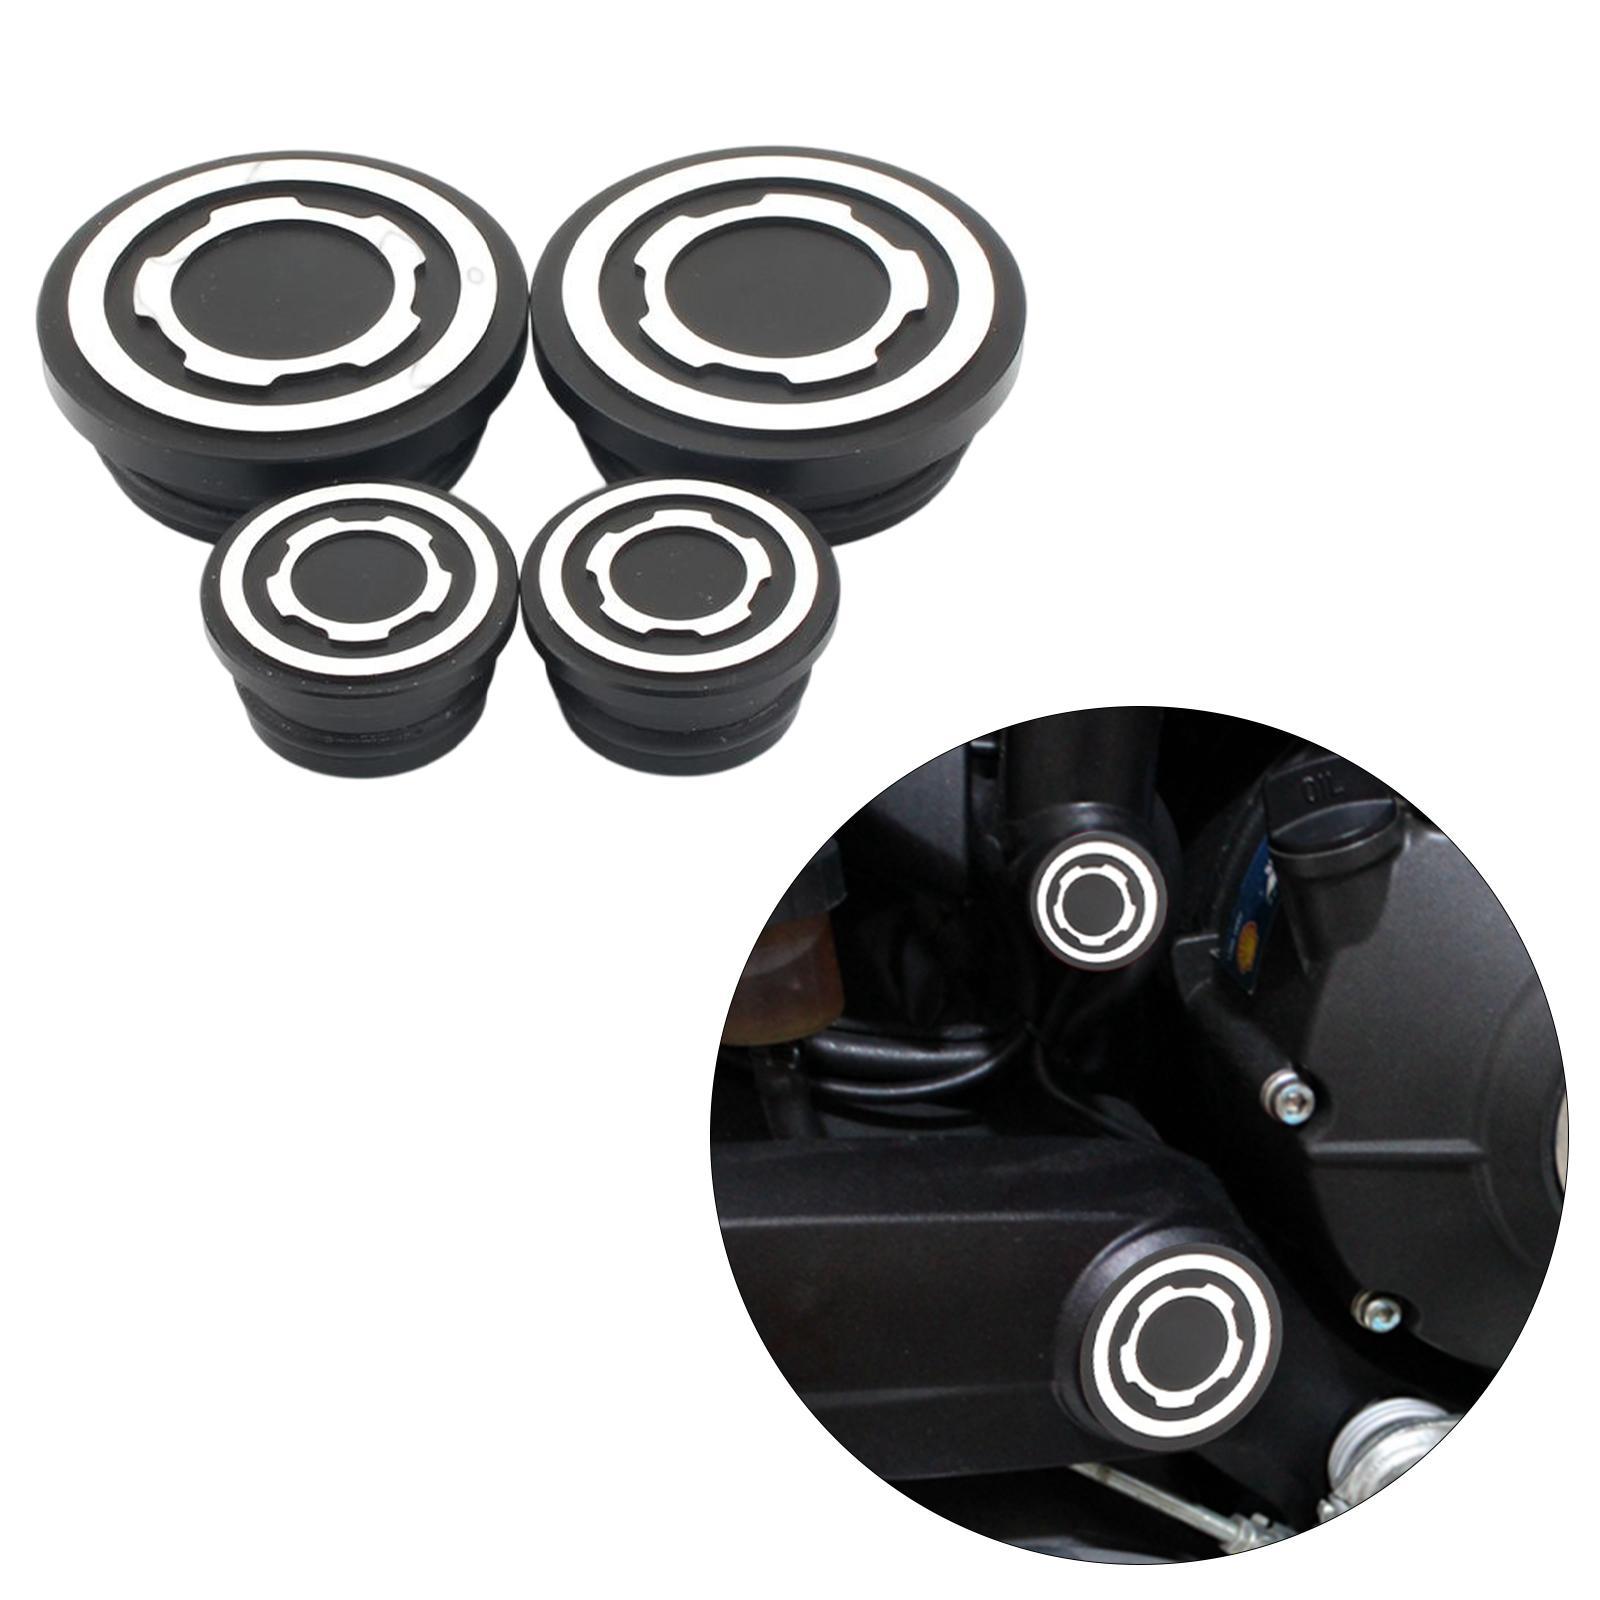 4x Motorbike Frame Hole Cover for  800 1100 Accessories